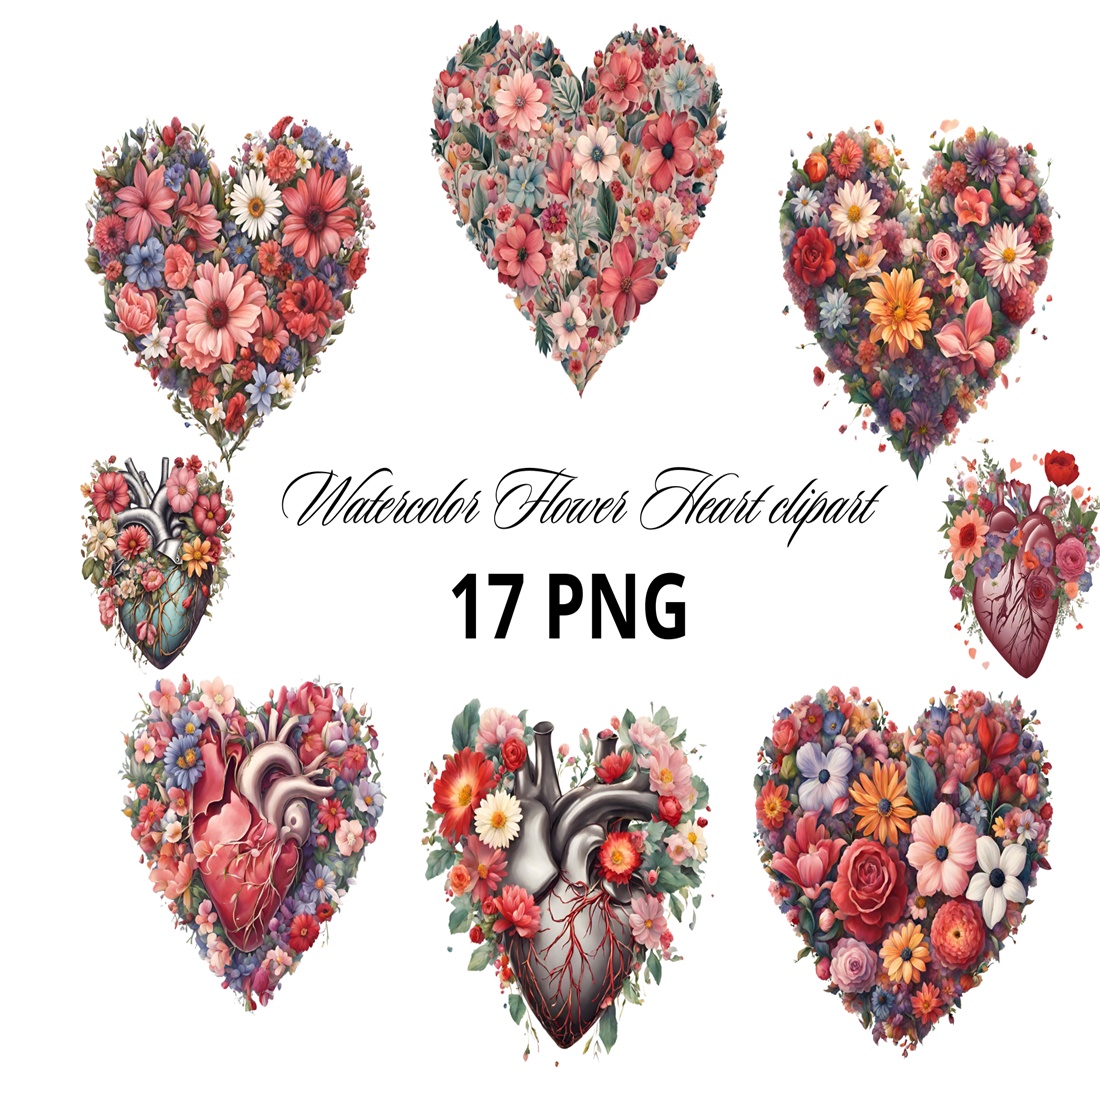 Watercolor Flower Heart clipart, Watercolor Valentine's heart, Valentine's Day PNG, Floral hearts png, Heart Flowers, 17 PNG, Commercial use cover image.